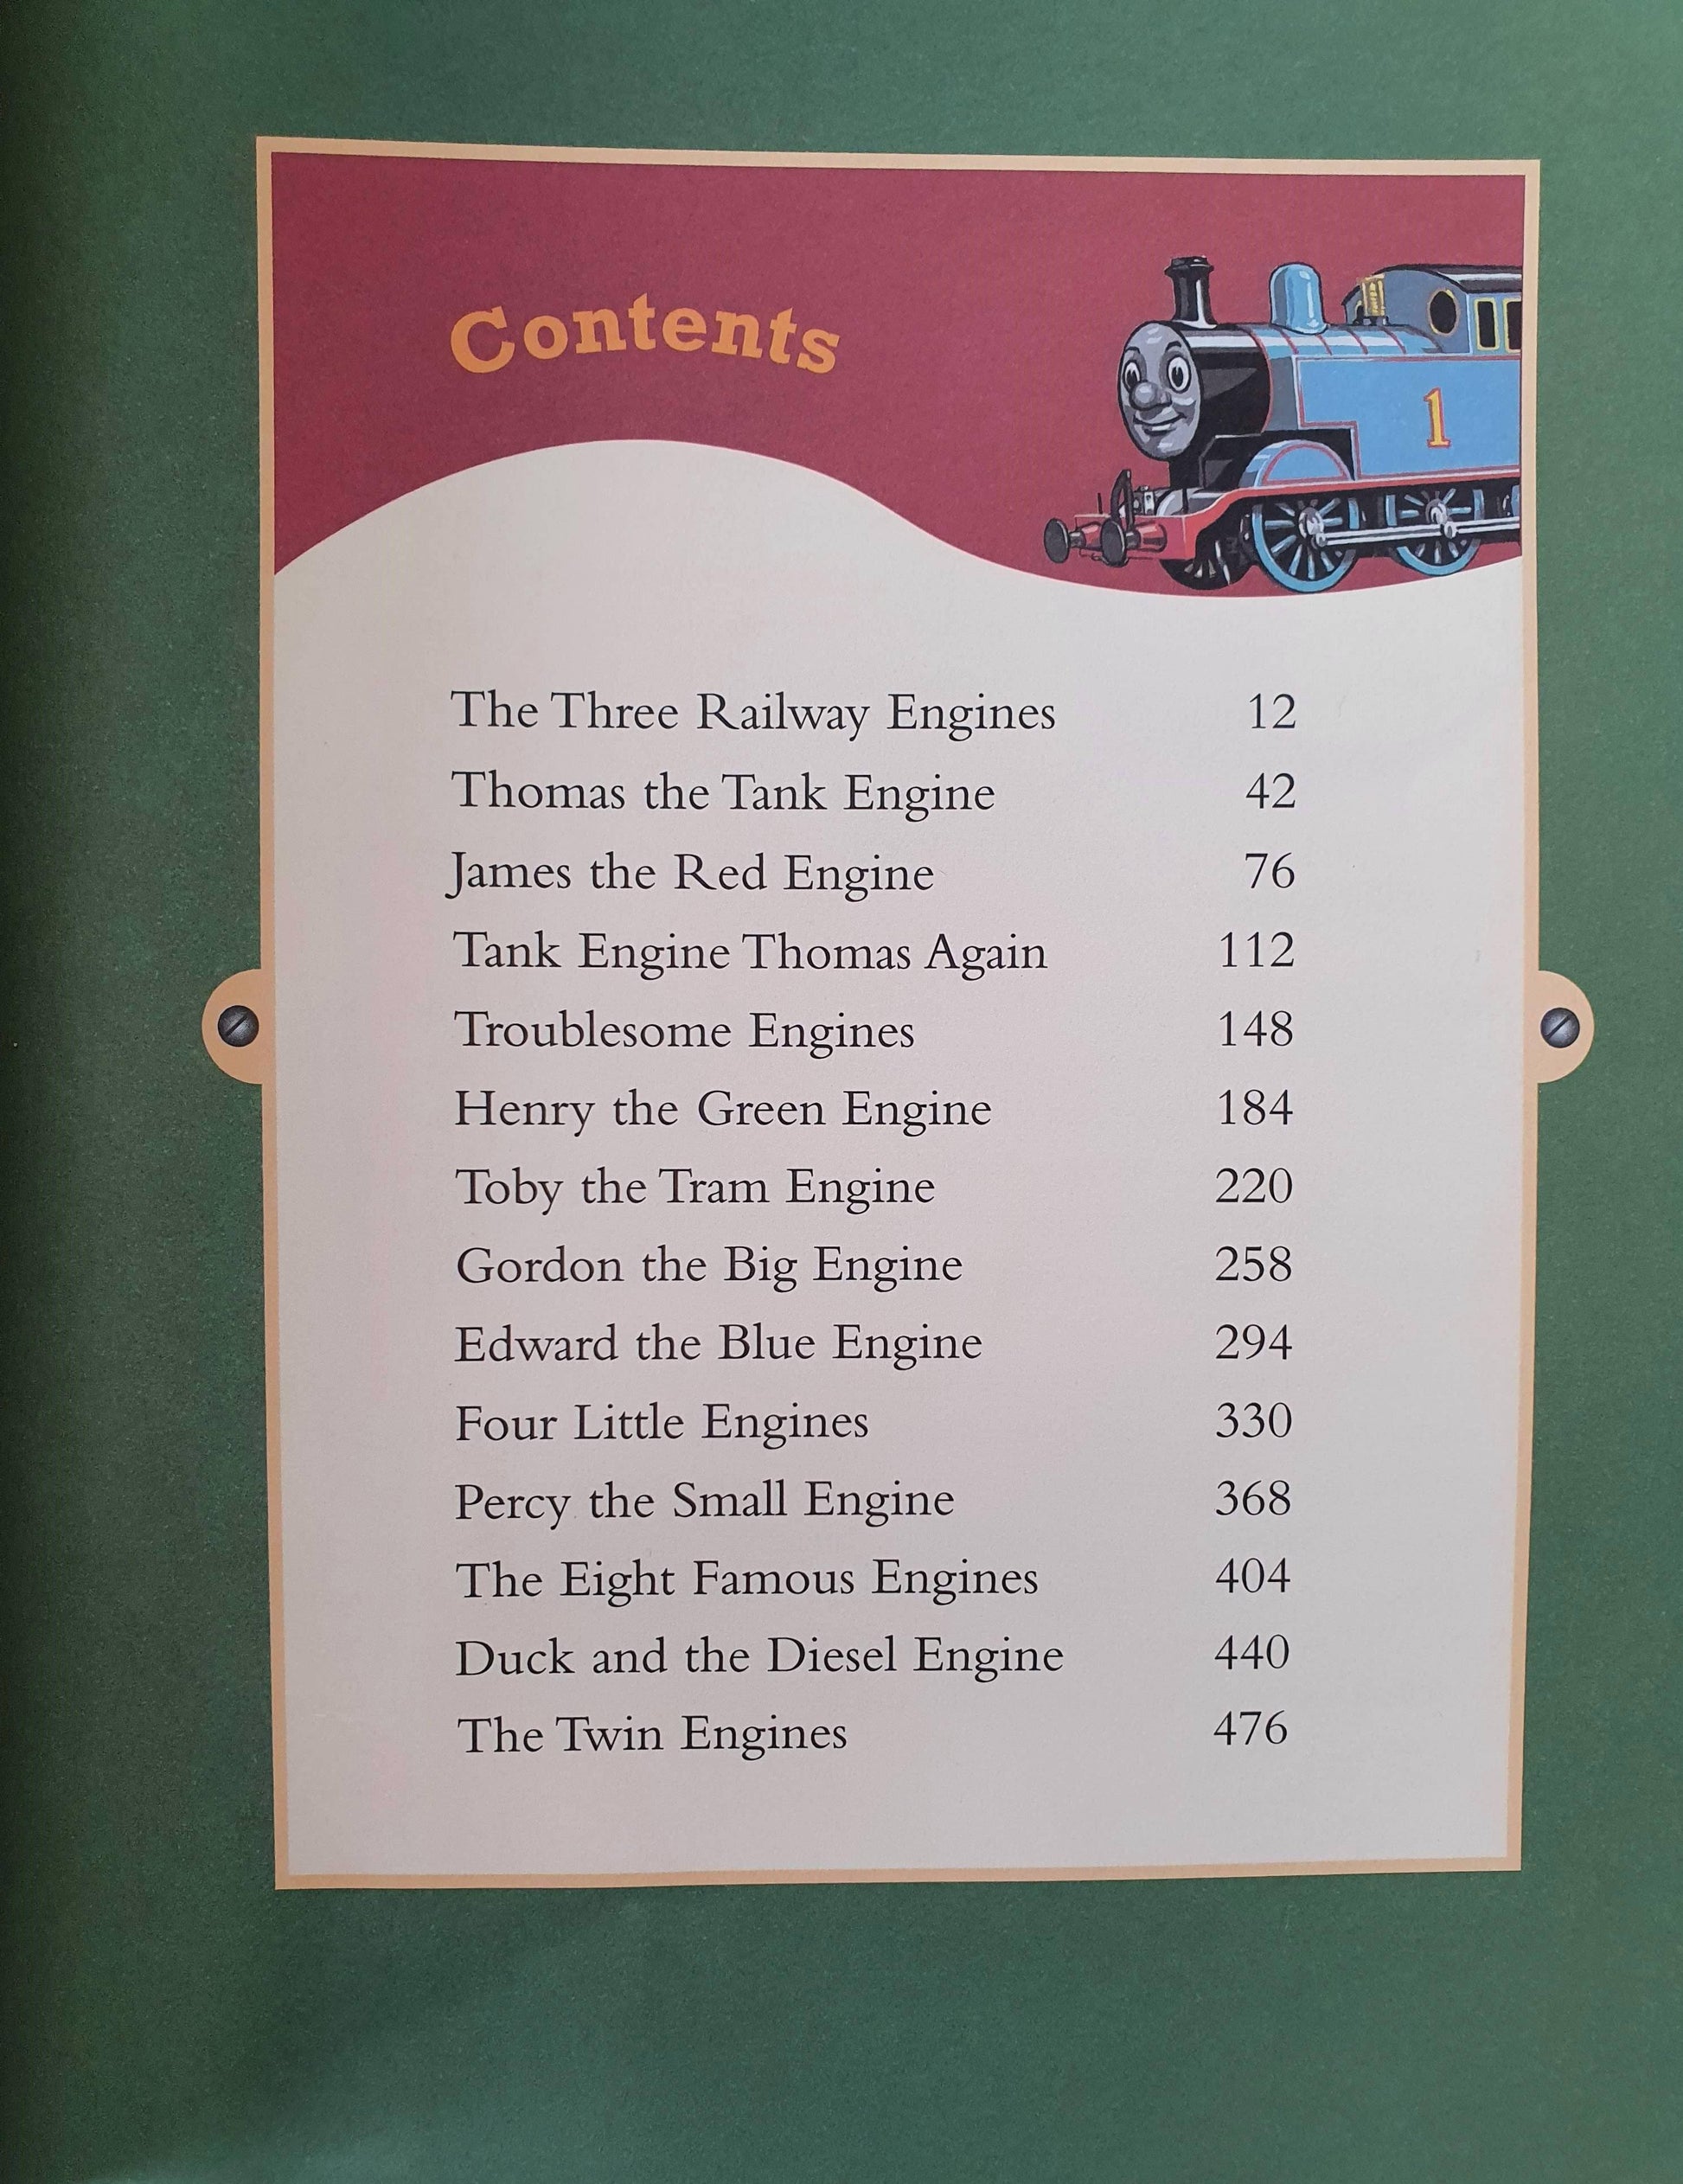 Thomas The Tank Engine- Story Collection Very Good, 3-5 Yrs Thomas & Friends  (6643131449529)